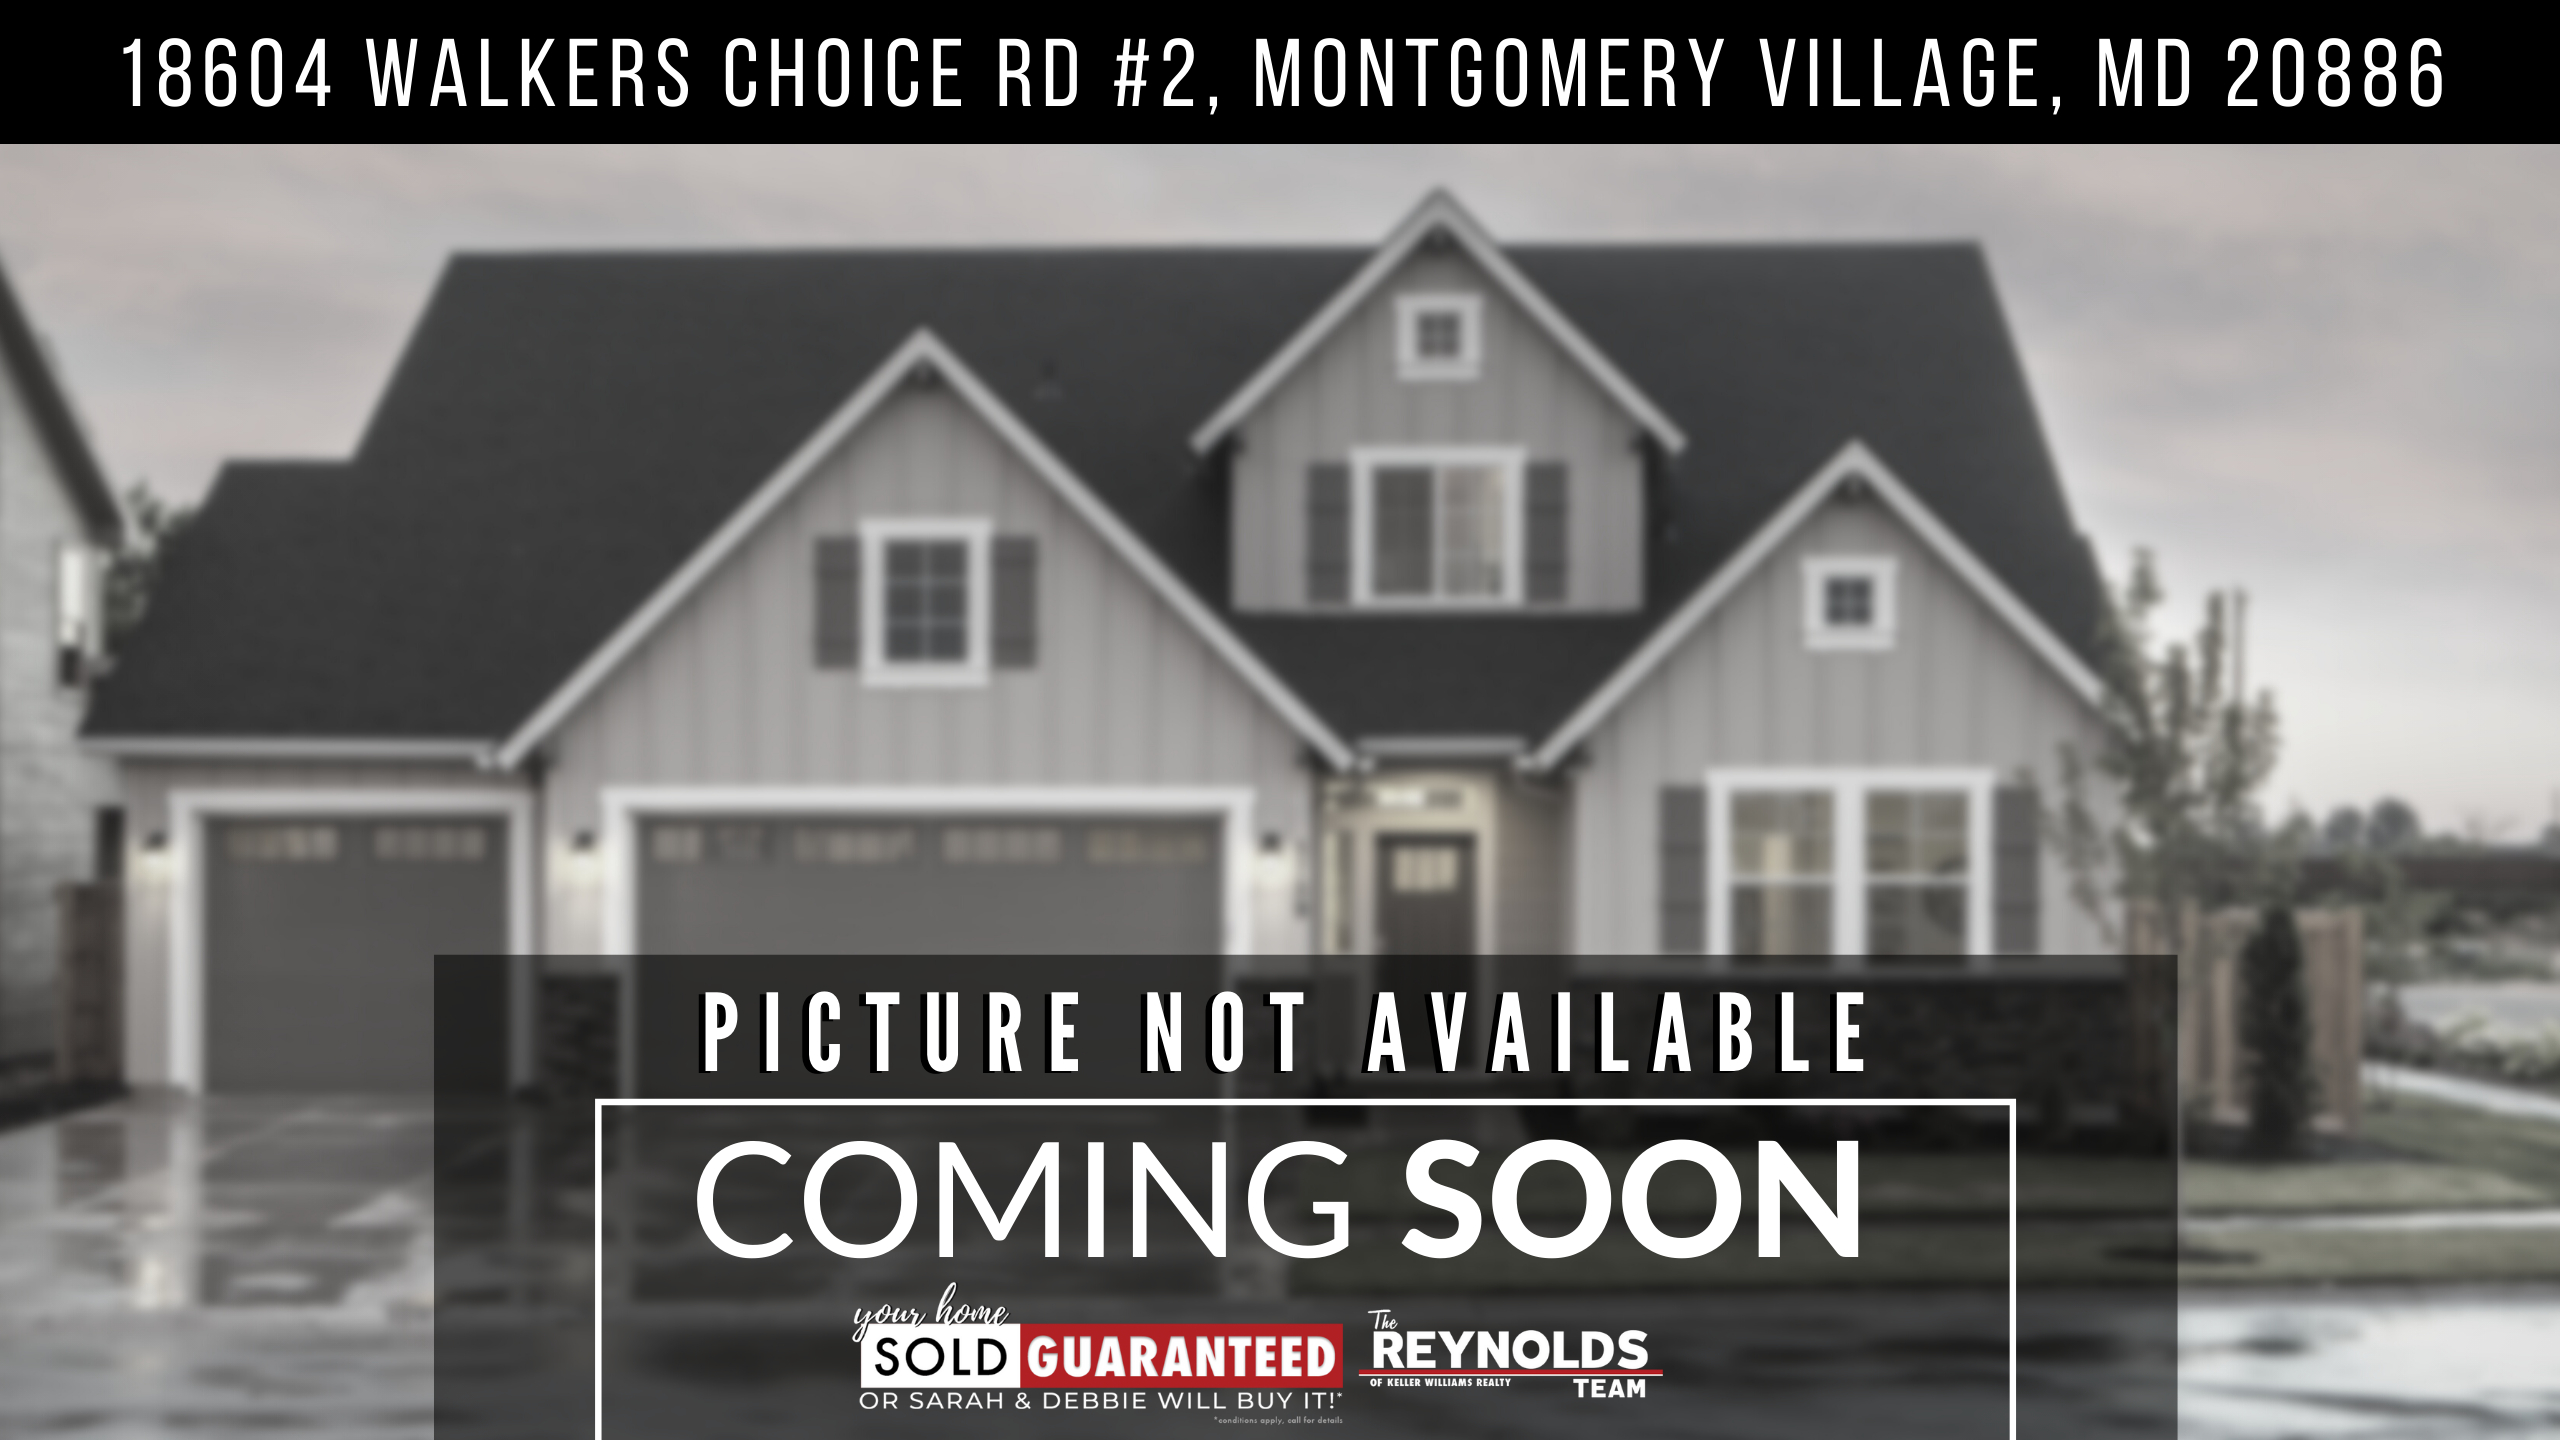 18604 Walkers Choice Rd #2, Montgomery Village MD 20886